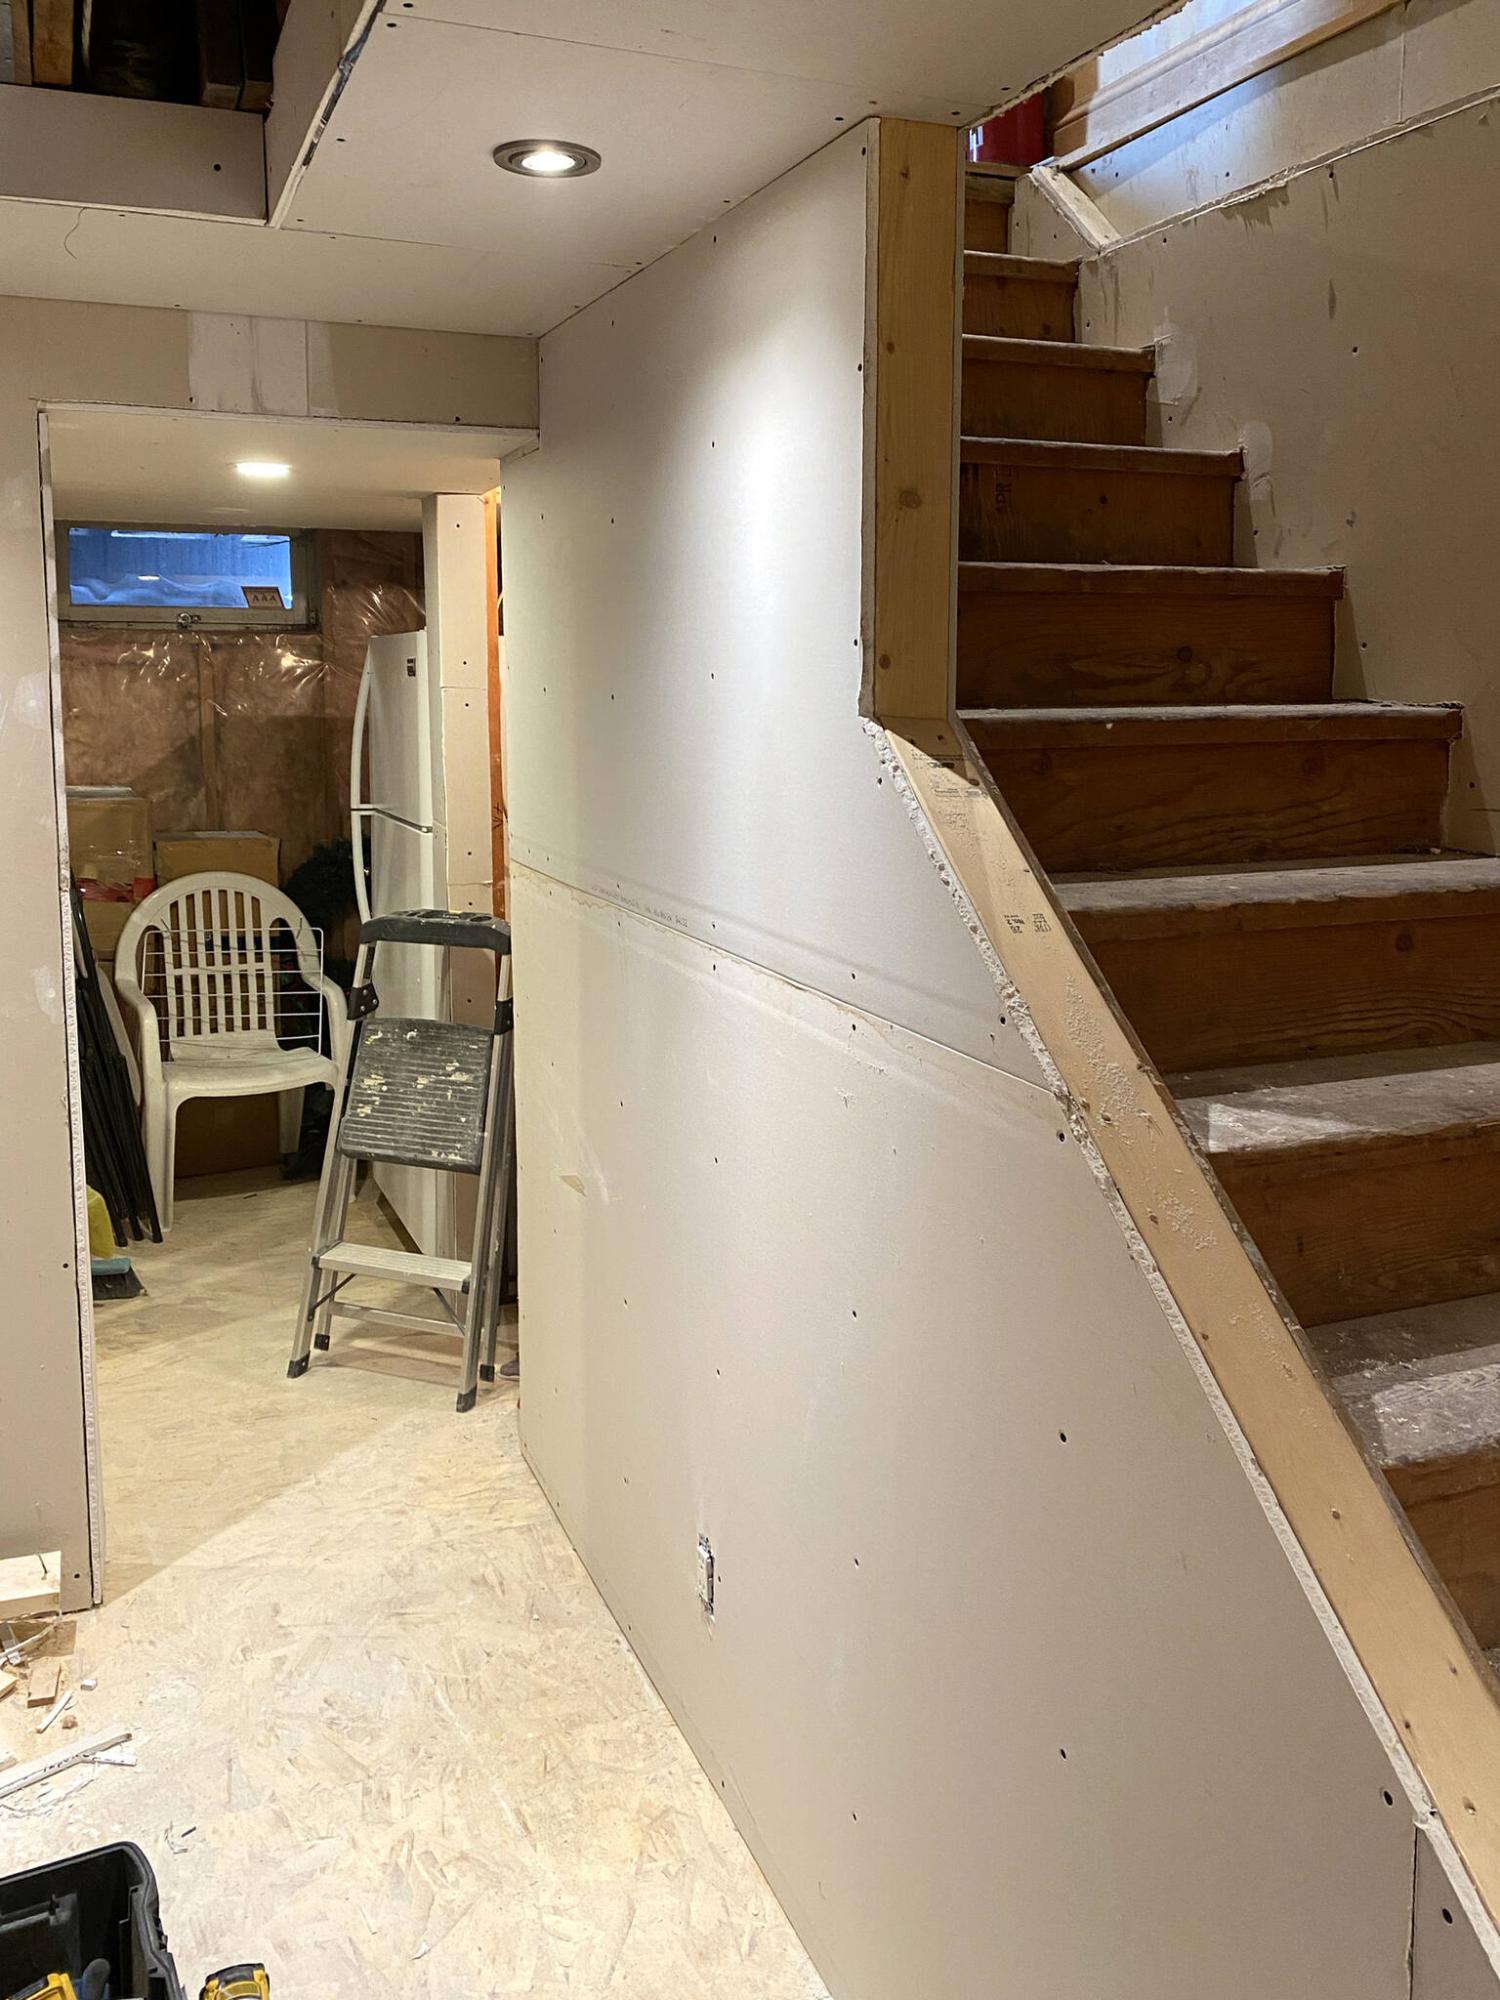  <p>Photos by Marc LaBossiere / Free Press</p>
                                <p>The staircase presented a challenge for negotiating full sheets of drywall downstairs.</p> 